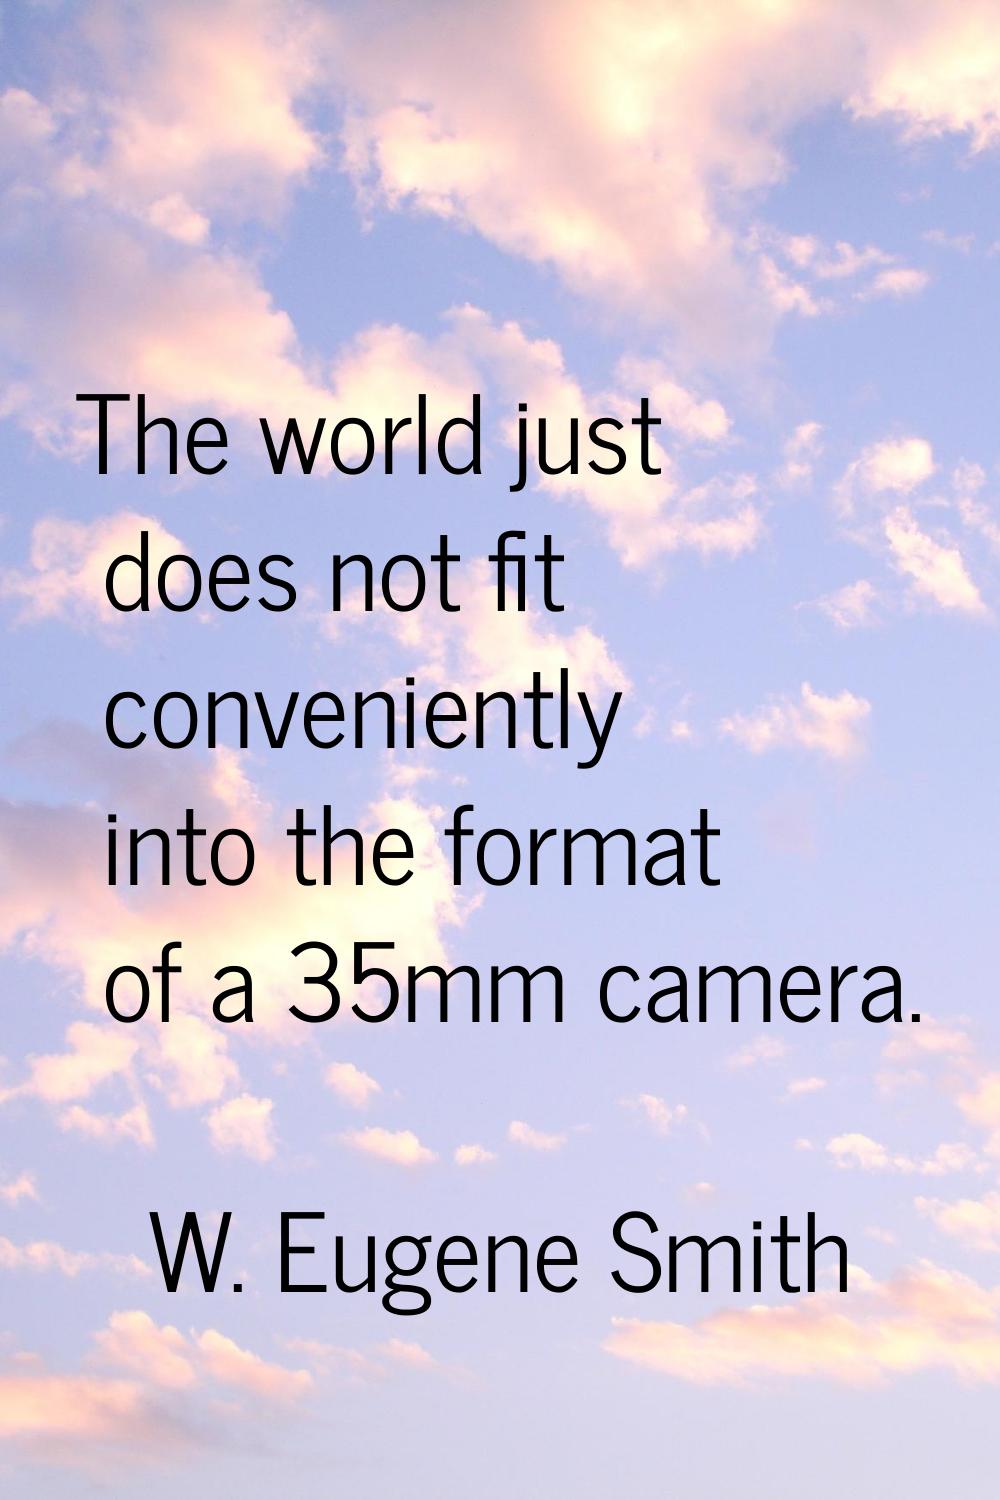 The world just does not fit conveniently into the format of a 35mm camera.